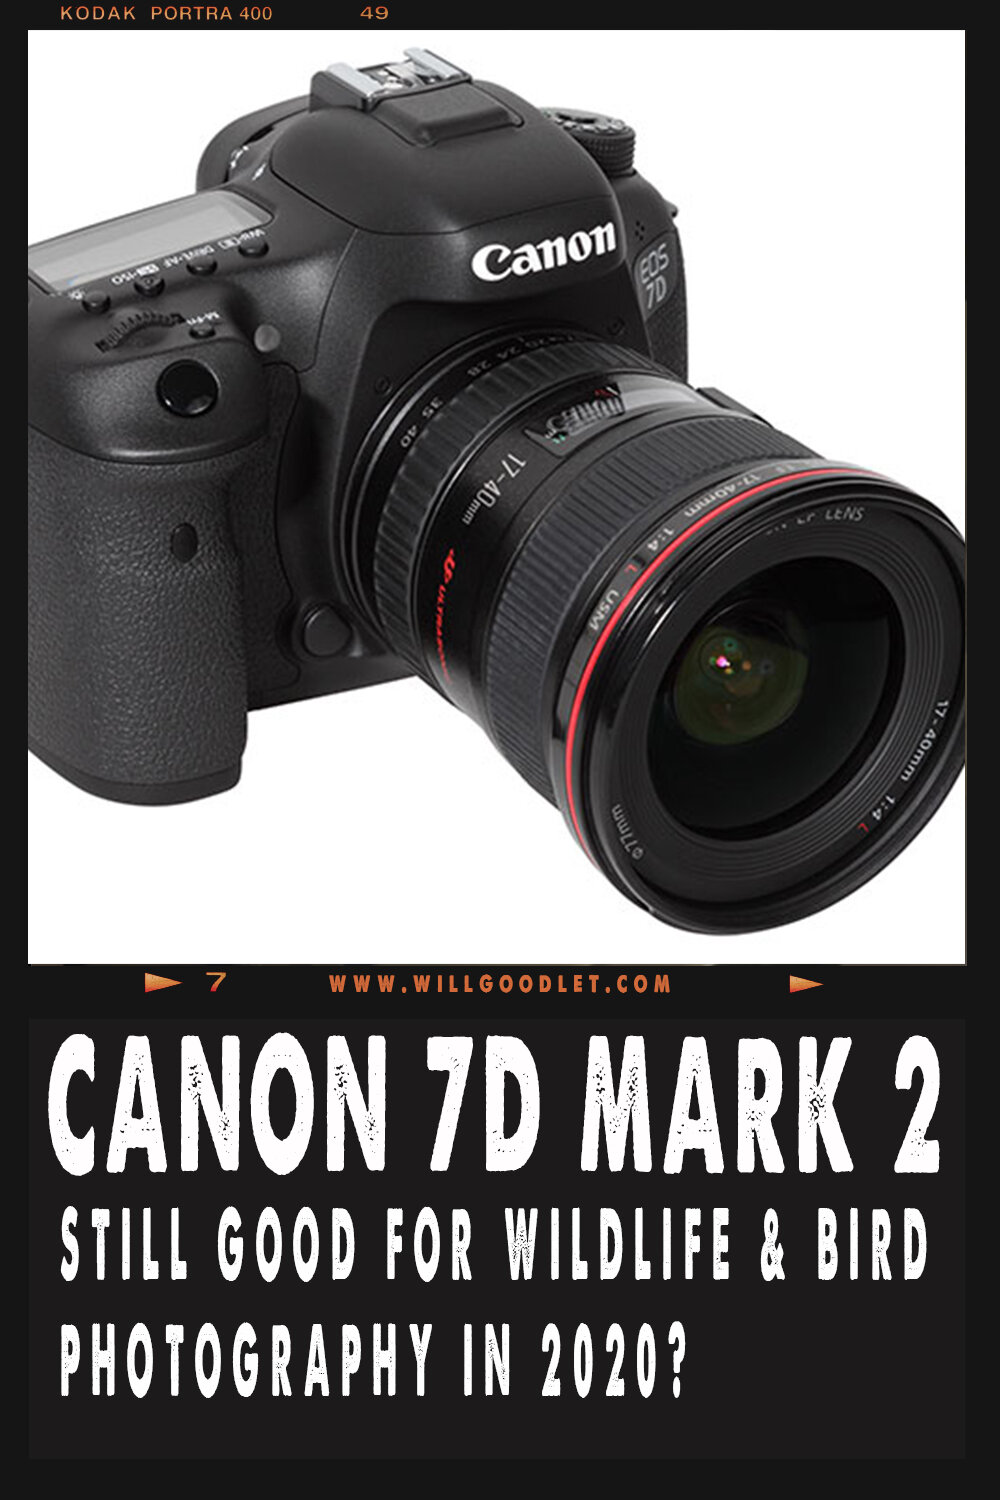 Is The 7D Mark ii Still Relevant For Wildlife & Bird Photography?